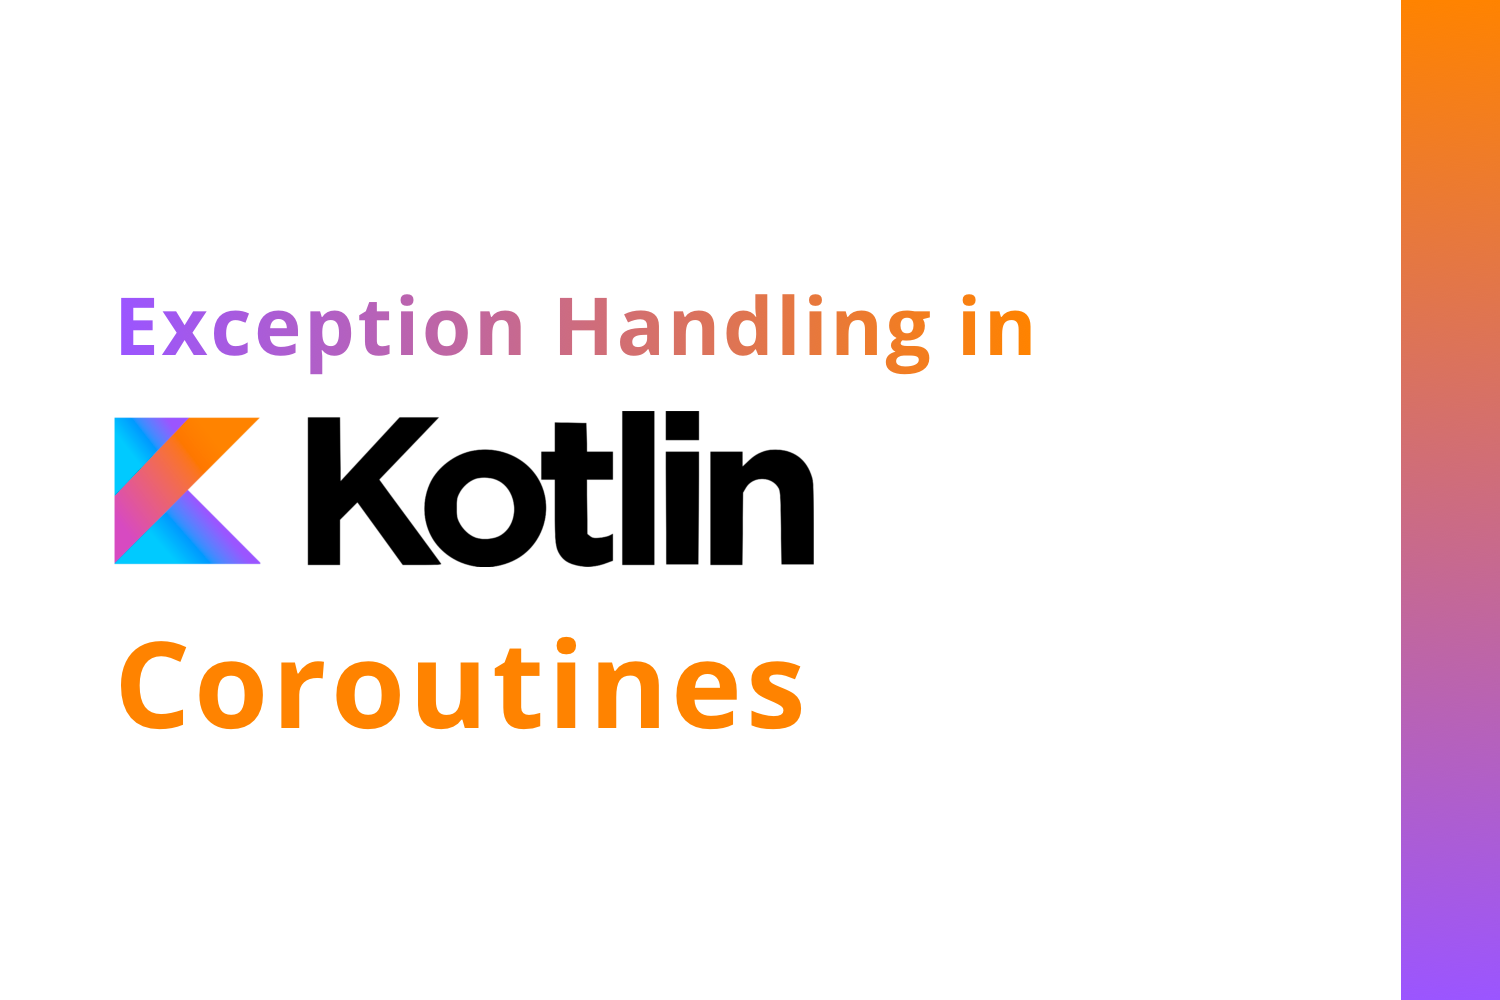 Exception Handling in Kotlin Coroutines